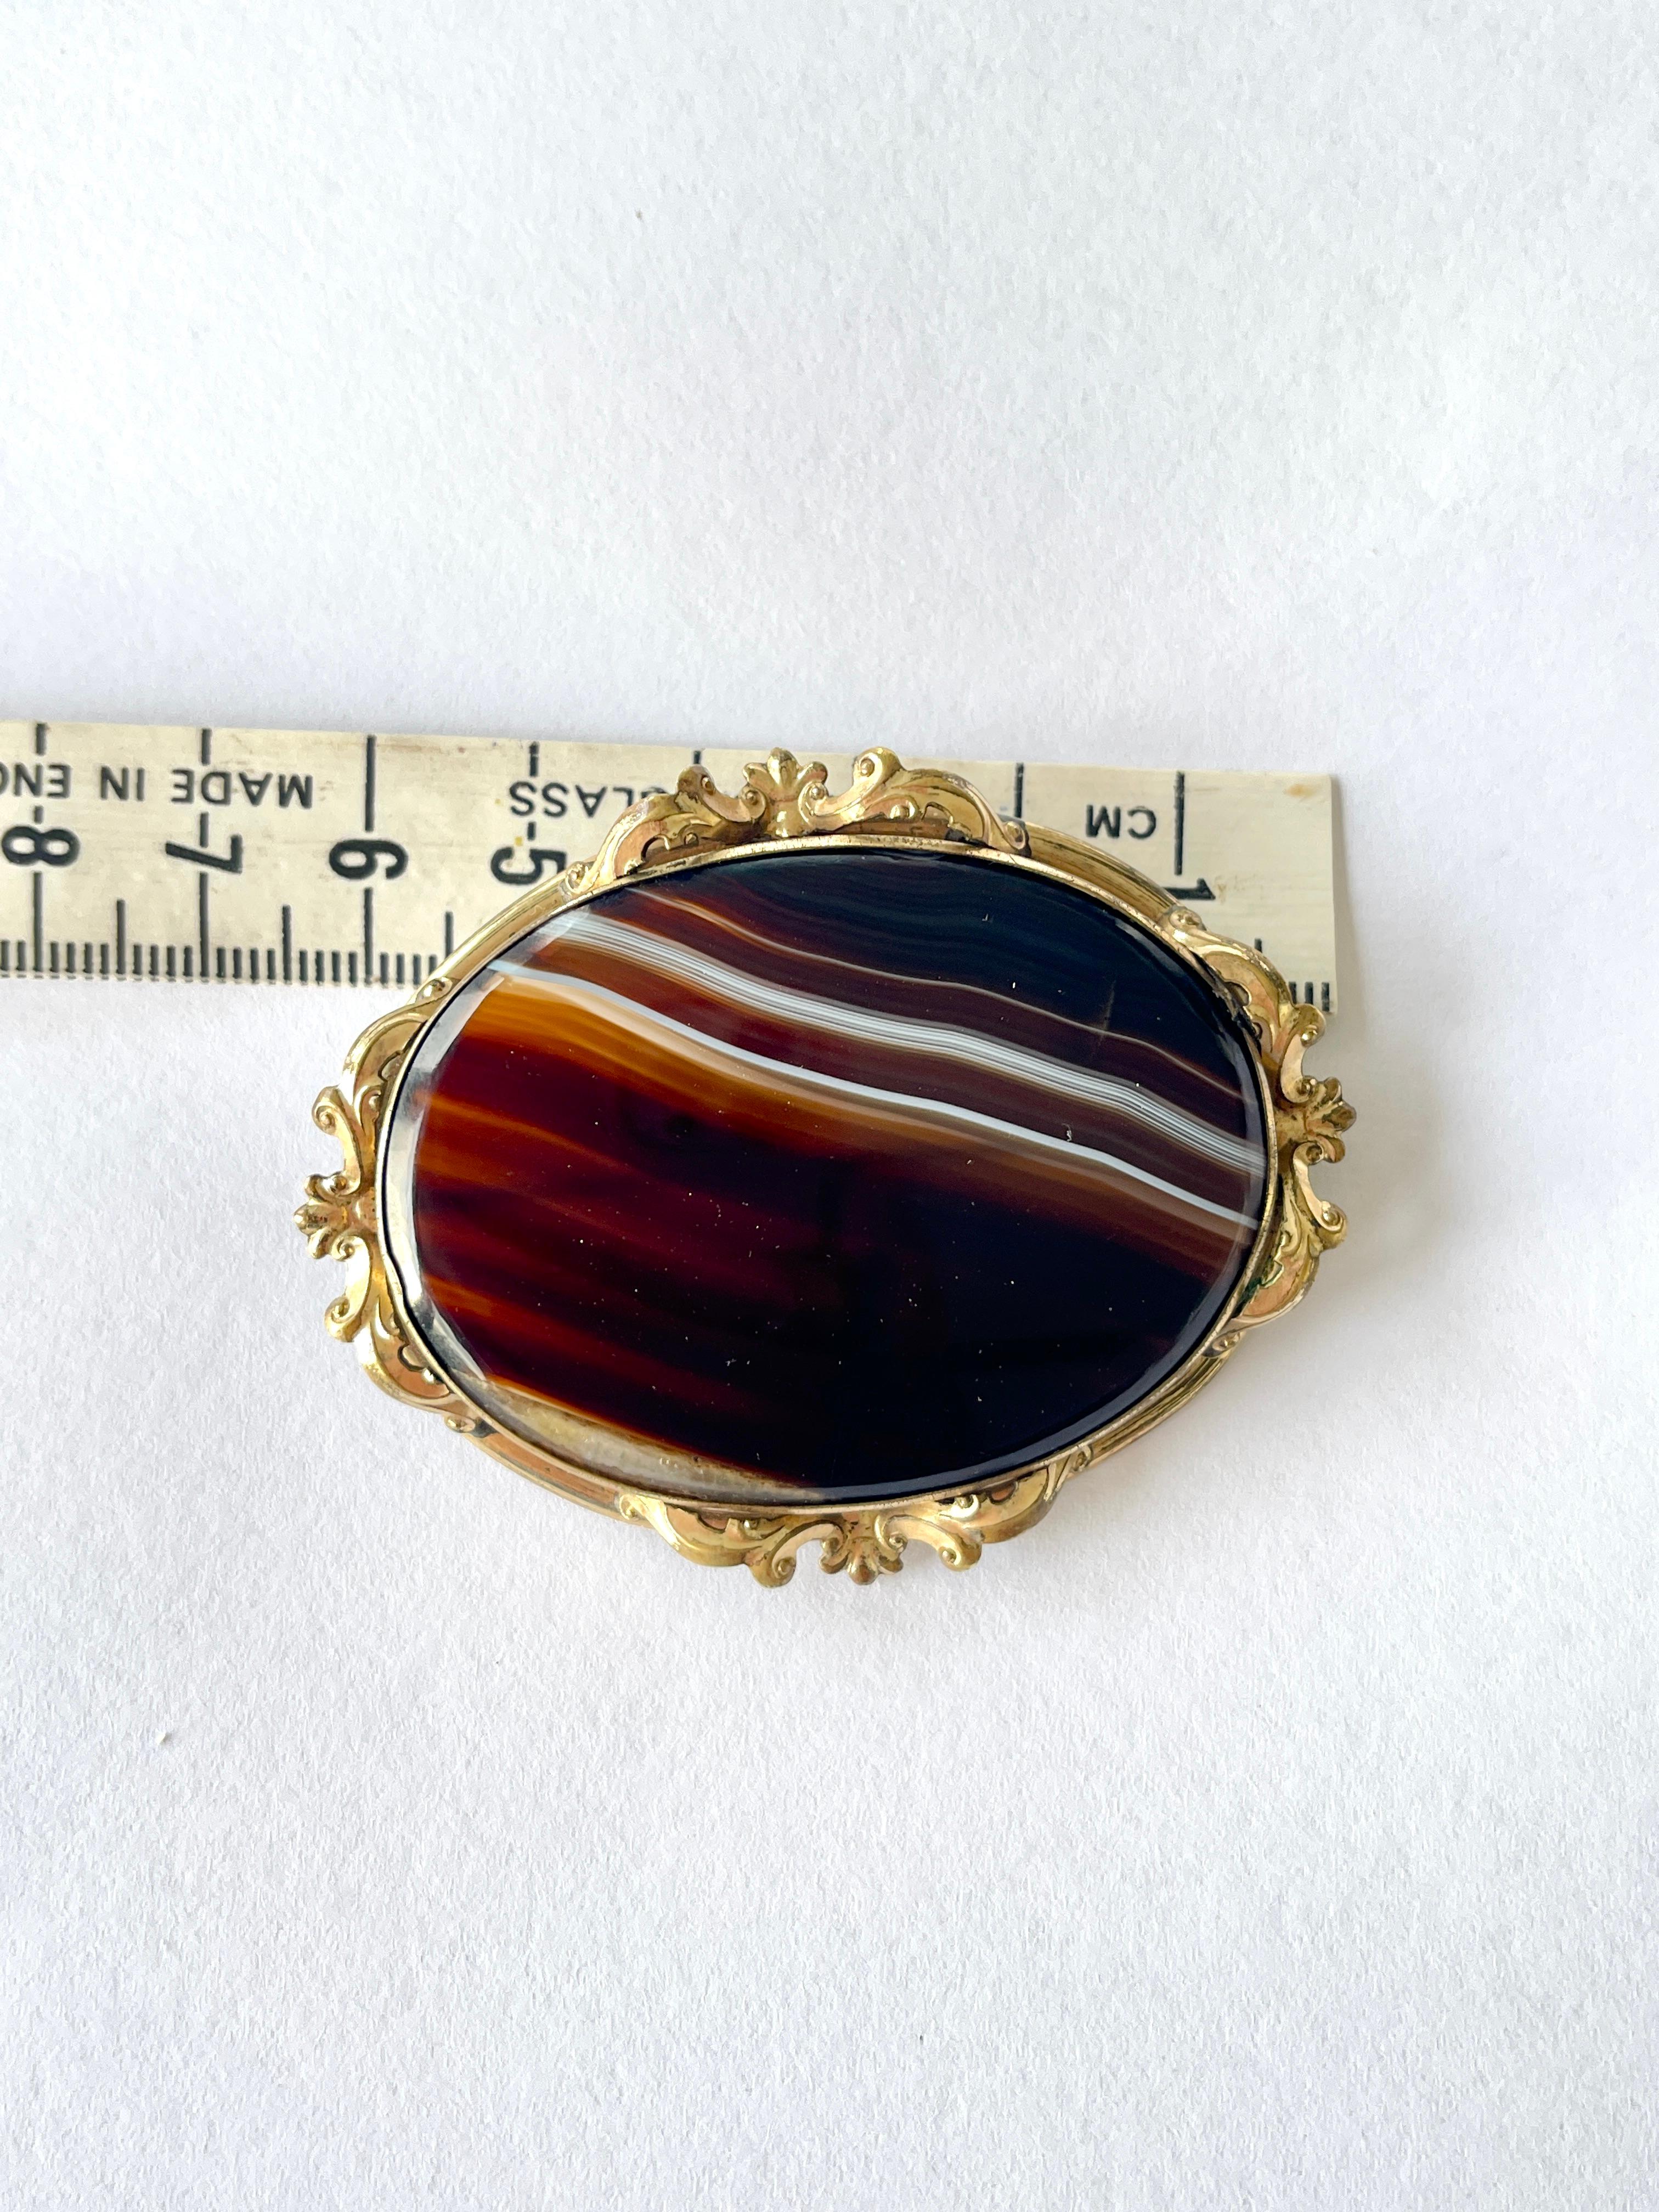 Large Antique Victorian Banded Agate Brooch c1890s Gold Gilt Good Condition In Good Condition For Sale In Mona Vale, NSW